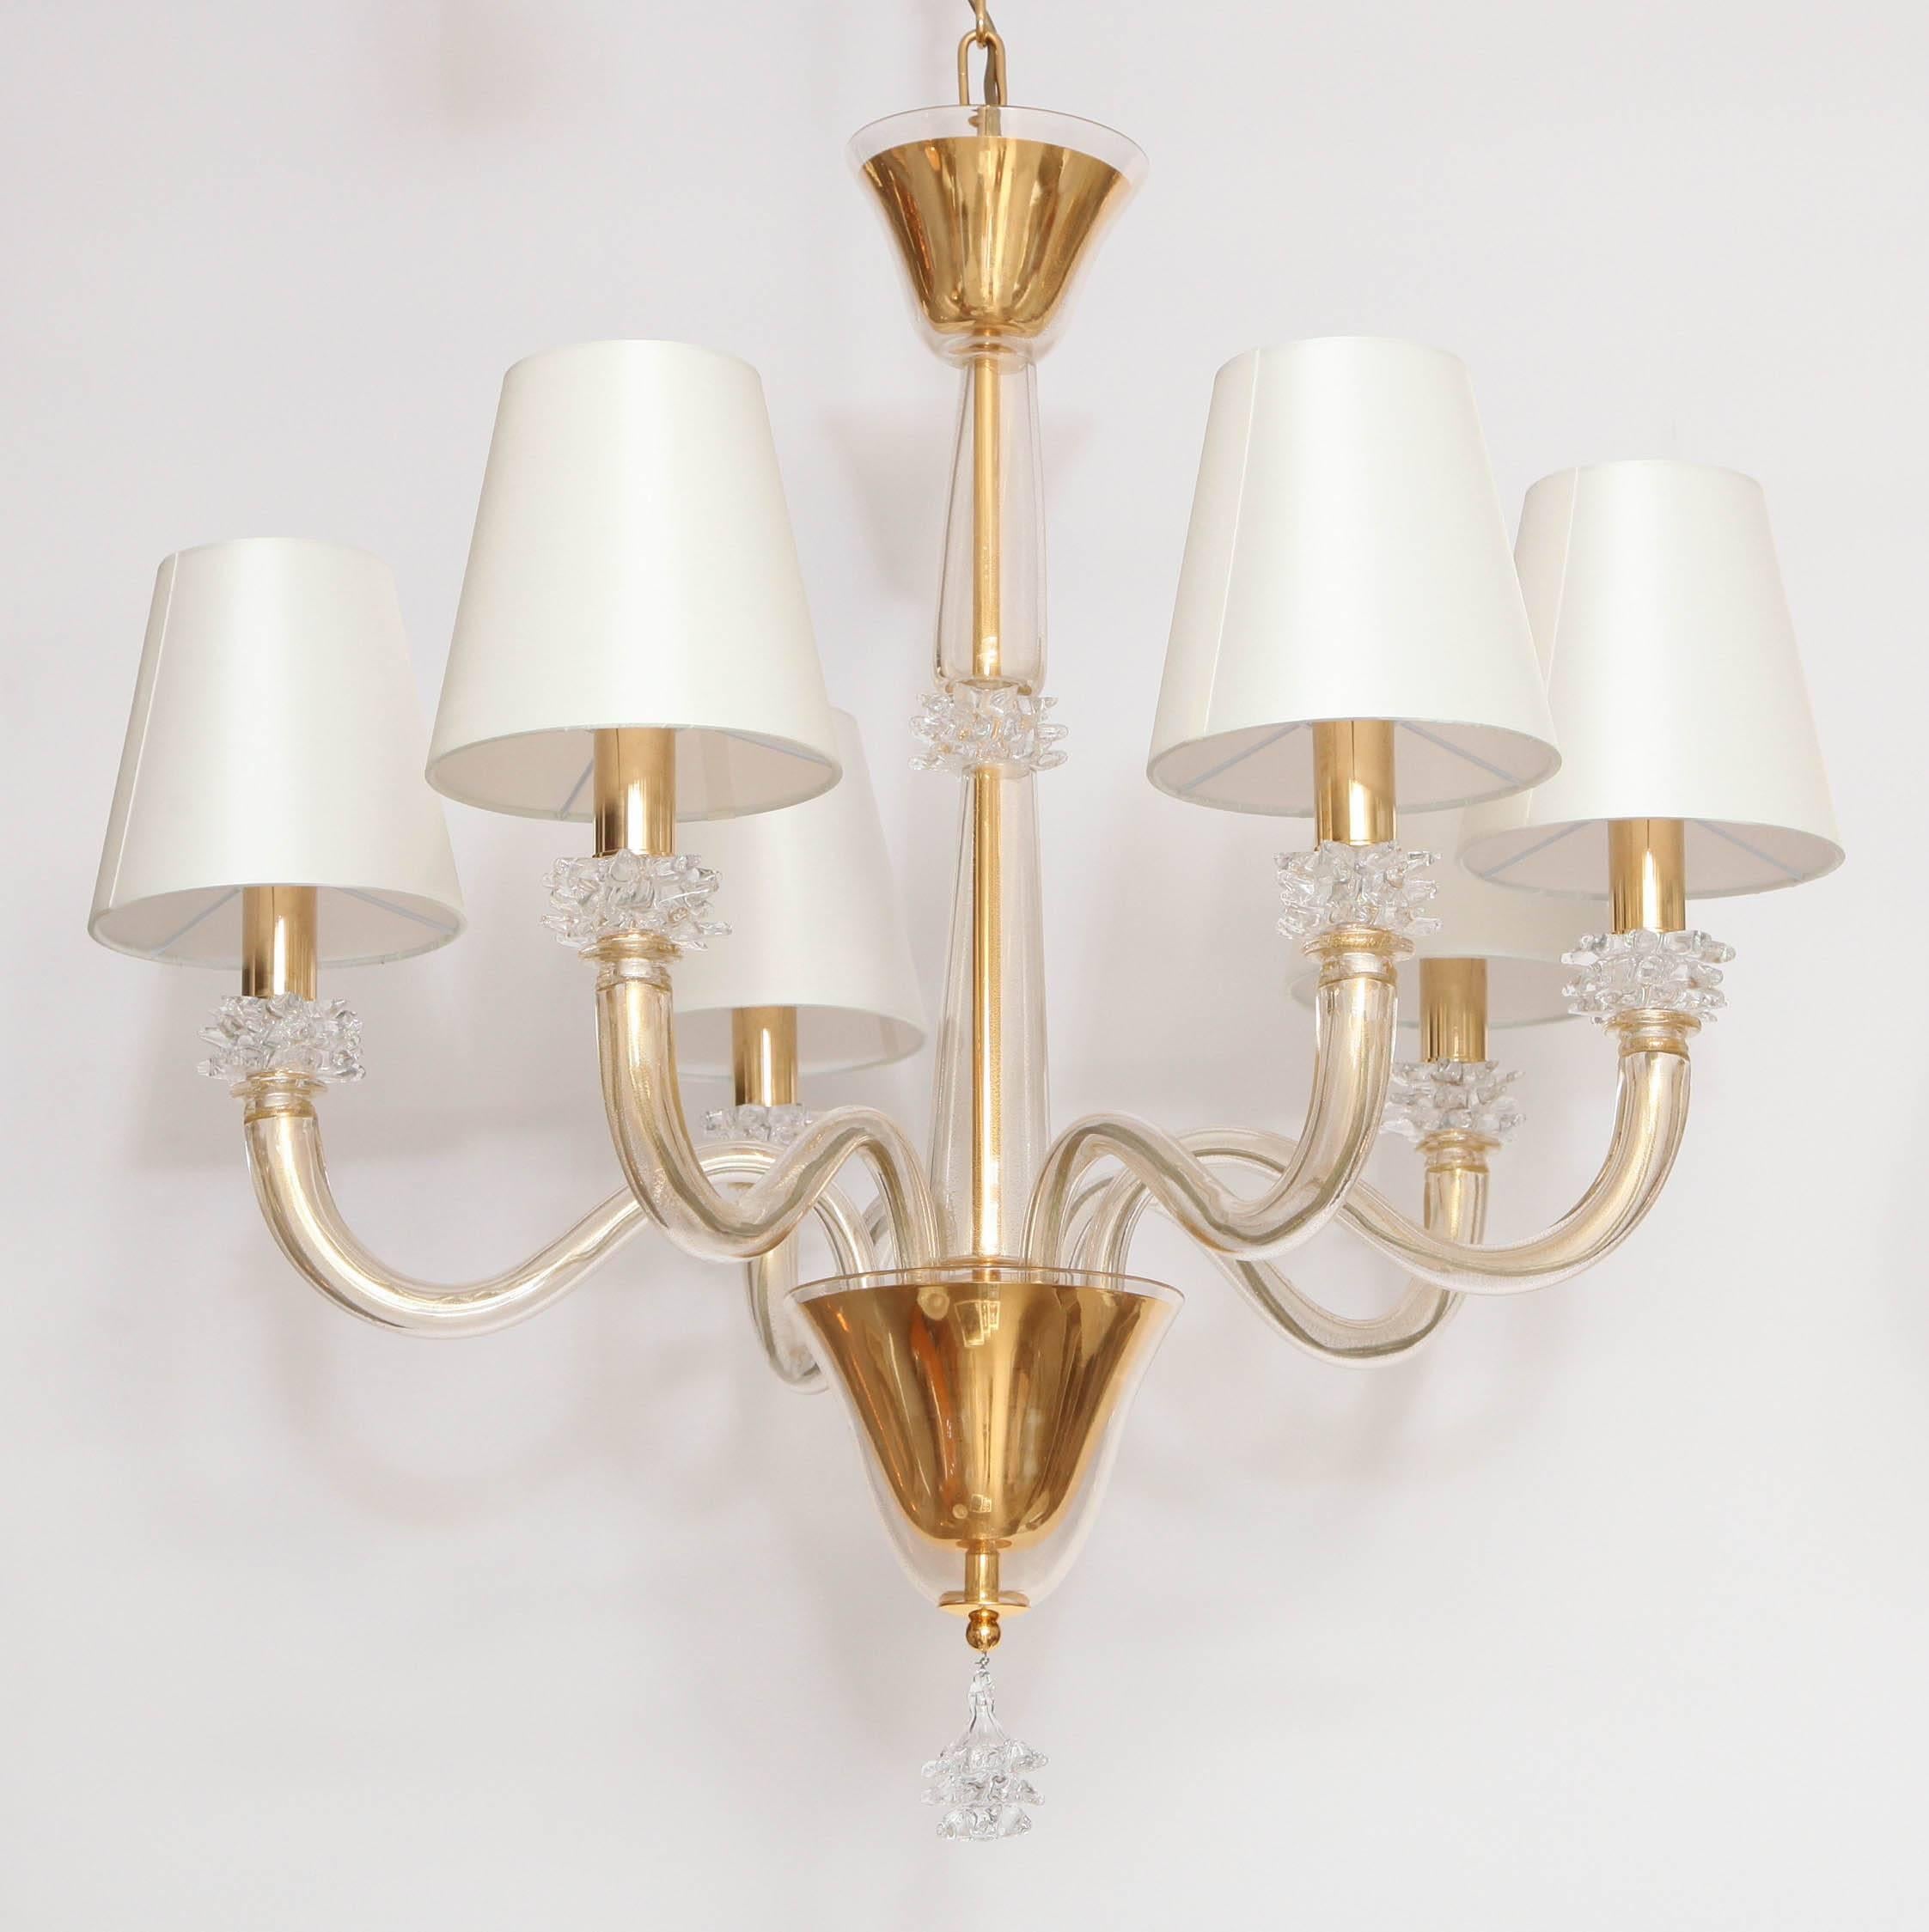 A charming, yet elegant six-arm Murano glass chandelier with gold leaf accents and lovely glass flower bobeches on each arm and at base.